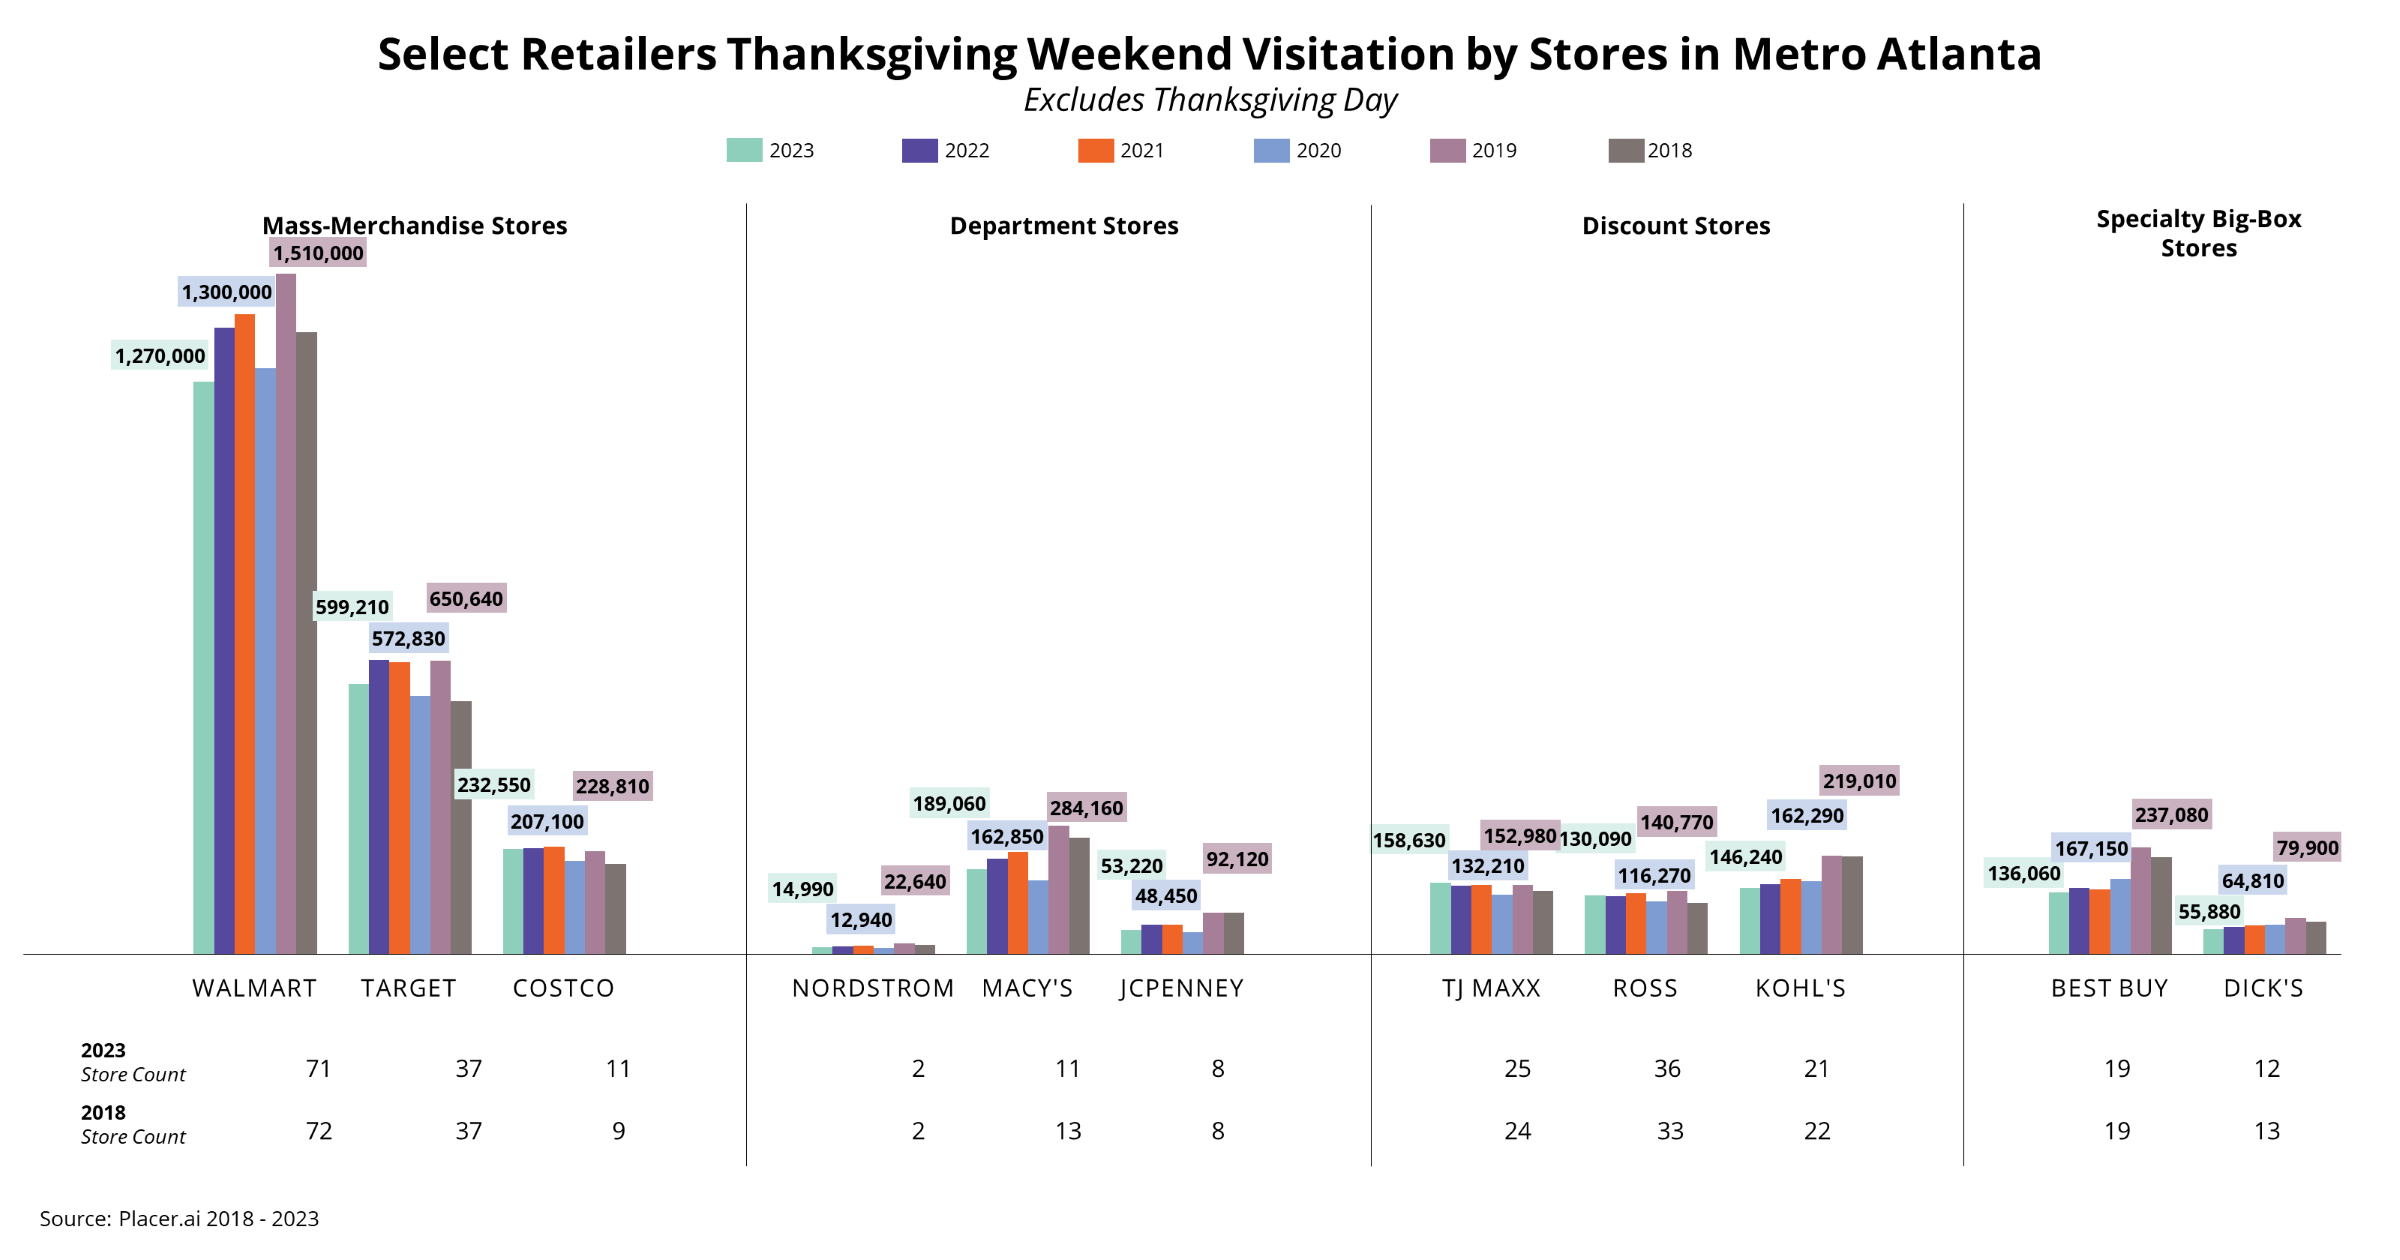 Graph showing store count numbers for stores in Metro Atlanta on Thanksgiving weekend